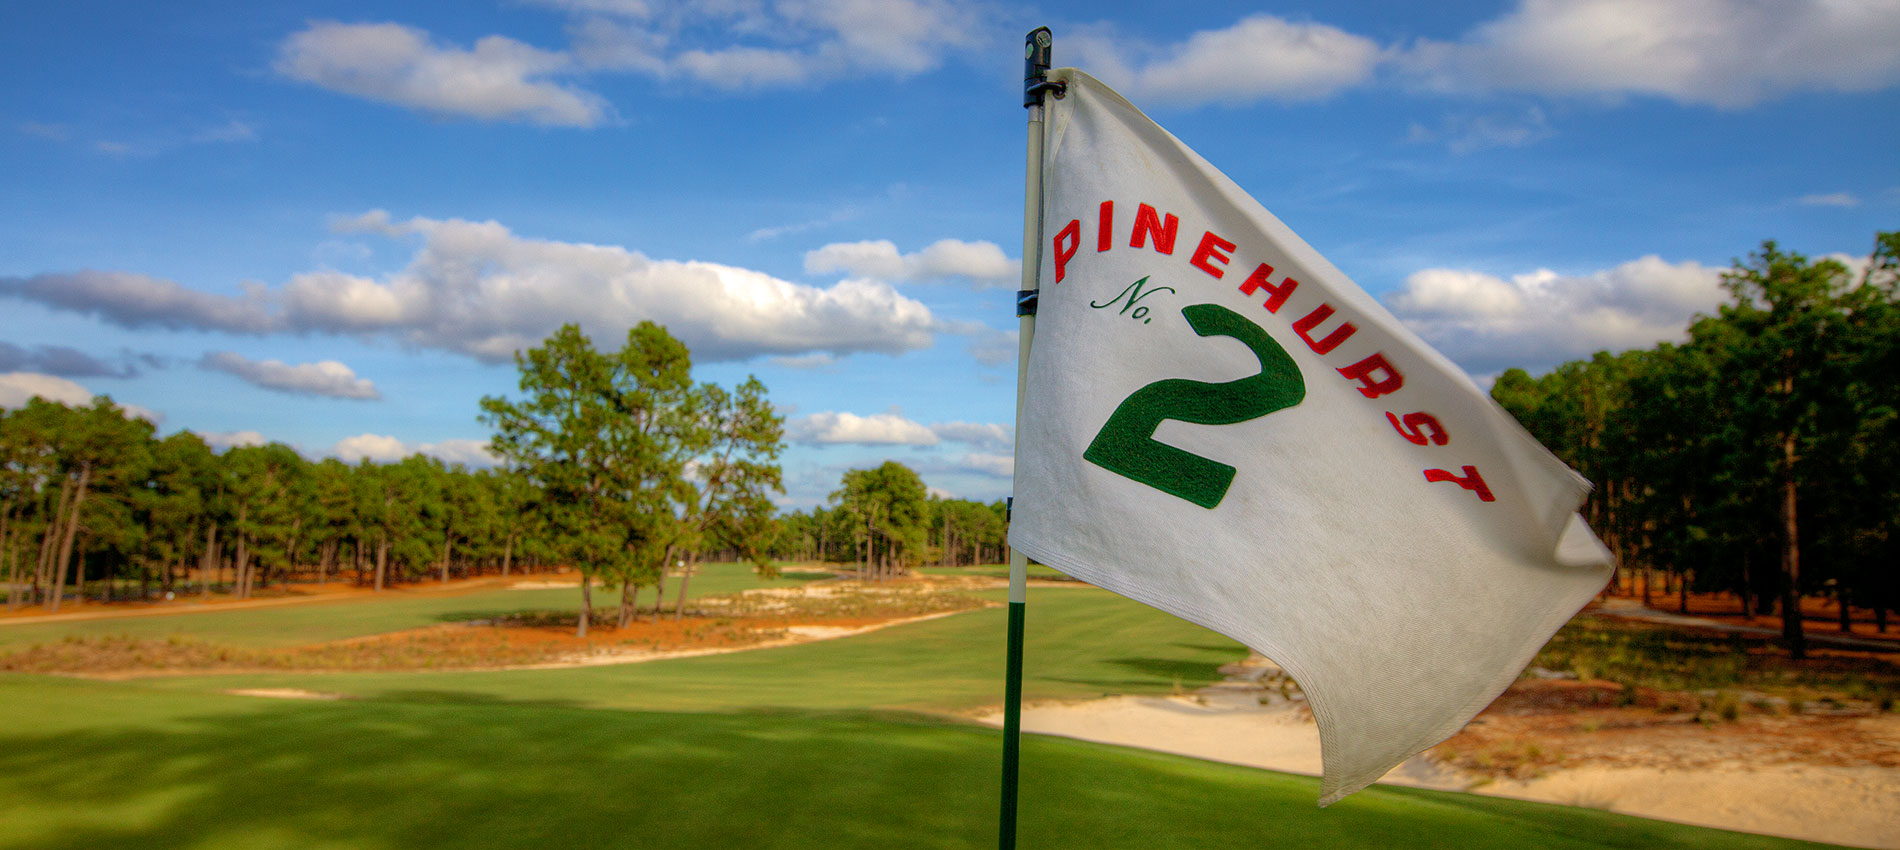 No. 2. Golf Courses & Tee Times